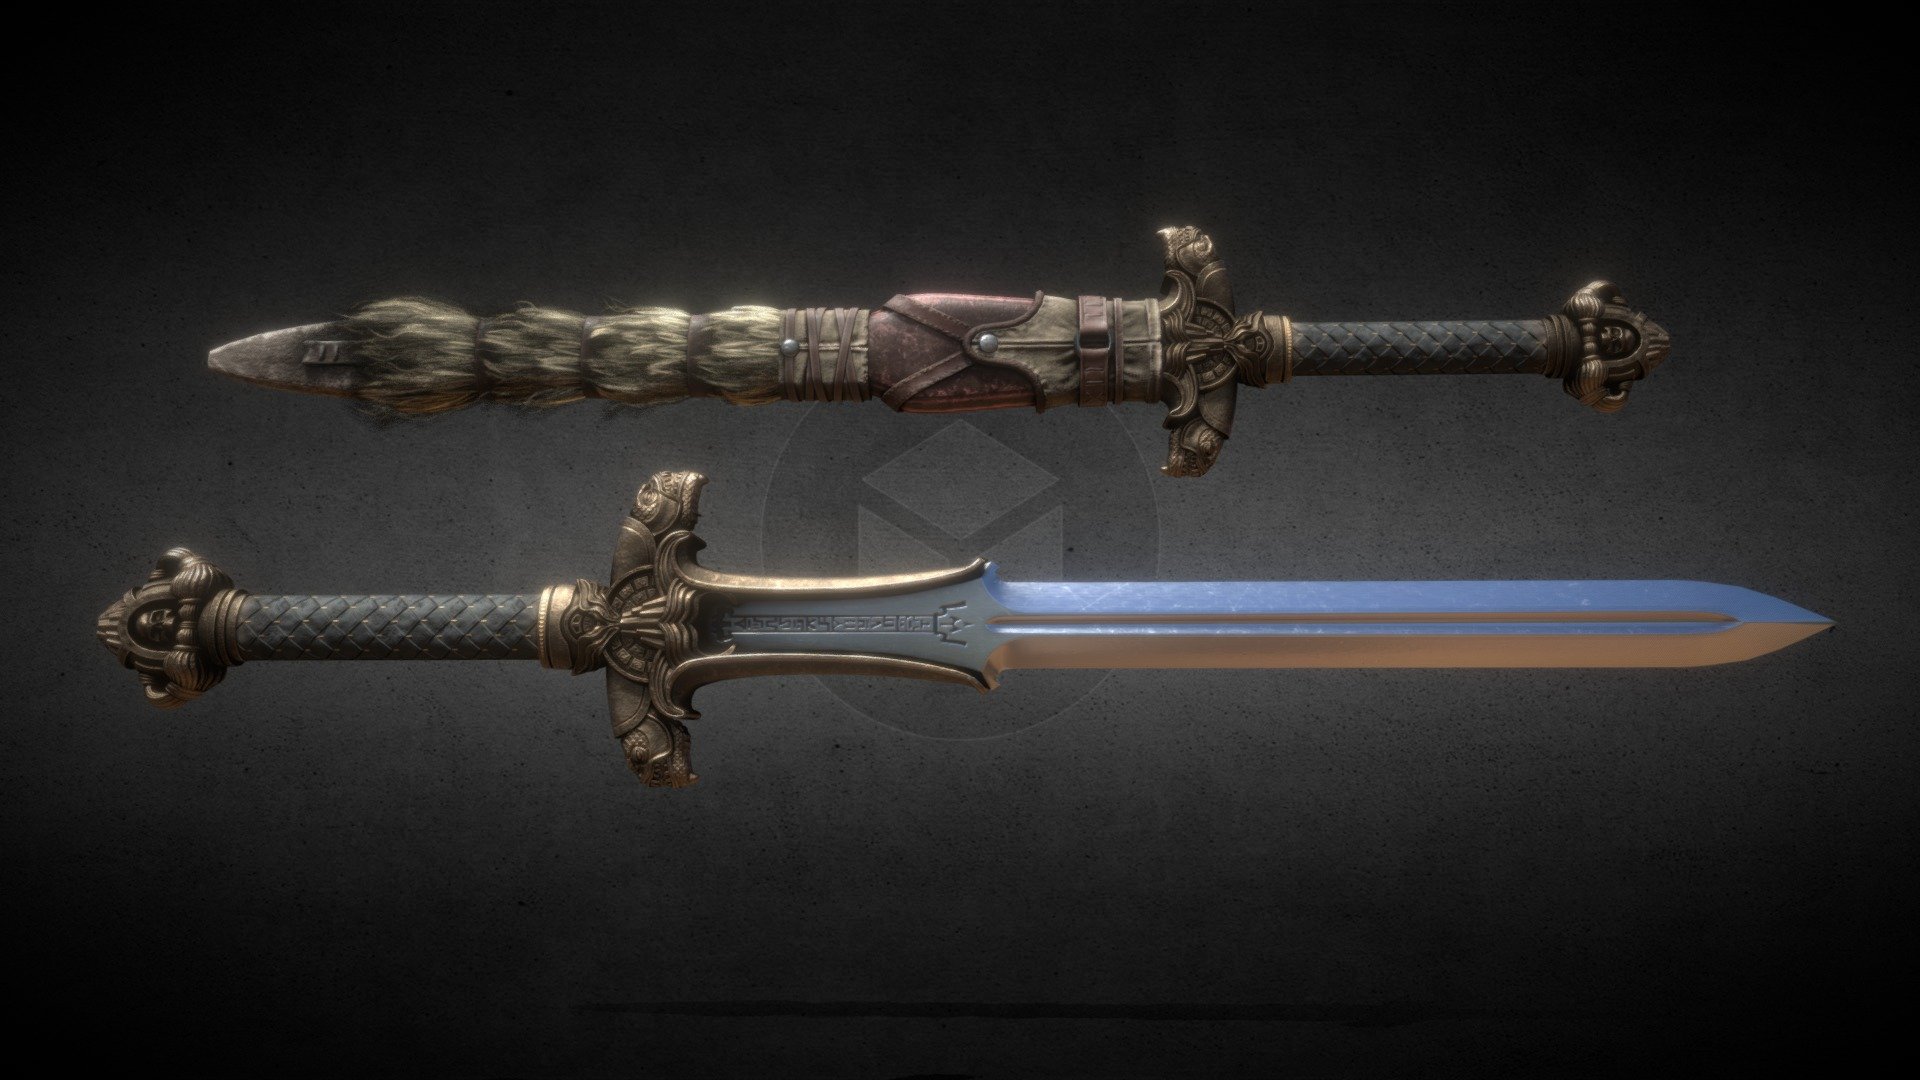 Conan's Atlantean Sword.

Game-Ready for Unreal Engine.

In this model there is two different workflow version:  UDIM version and UV versions both.

*UV version:  3 materials _sword_sheath_fur 

*UDIM version: There are three UDIM tiles: Sword(4k) - Sheath(4k) - Fur(2k)    .1001  .1002  .1003

4K Metallic Based PBR Workflow 16-Bit PNG Tex Maps : Base Color/Roughness/Metallic/Ao/Specular f0/Normal/Opacity

Model is sculpted and retopologized in Blender and Z-brush
Texture Maps are baked and painted in Substance Painter/Blender and Photoshop

SHEATH-FUR : 4767 Vertex / 3292 Polys
SWORD: 12336 Vertex / 11356 Polys

Scaled as real world (cm)  Sword: 143 cm

No subdivisons

File format: Alembic (.abc)     (I will upload  /.blend / .fbx / .obj / .dae /  when needed.)

Shapekey baked animation 3d model